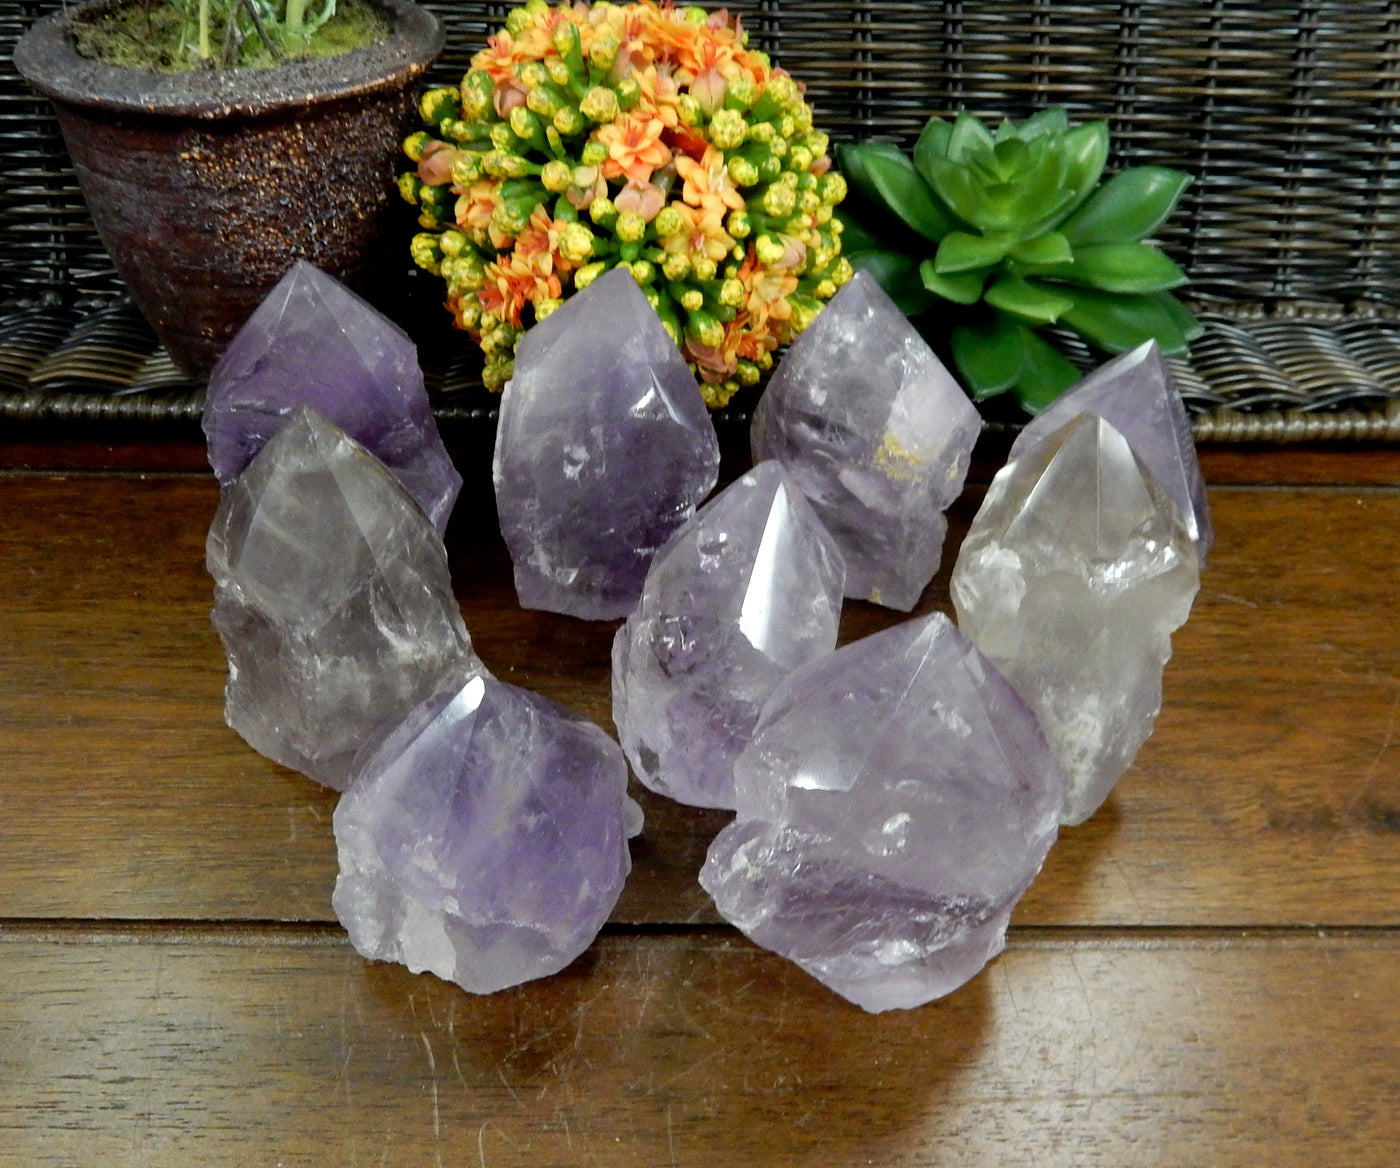 8 Raw Amethyst Semi Polished Points on wooden table with various decorations in the background